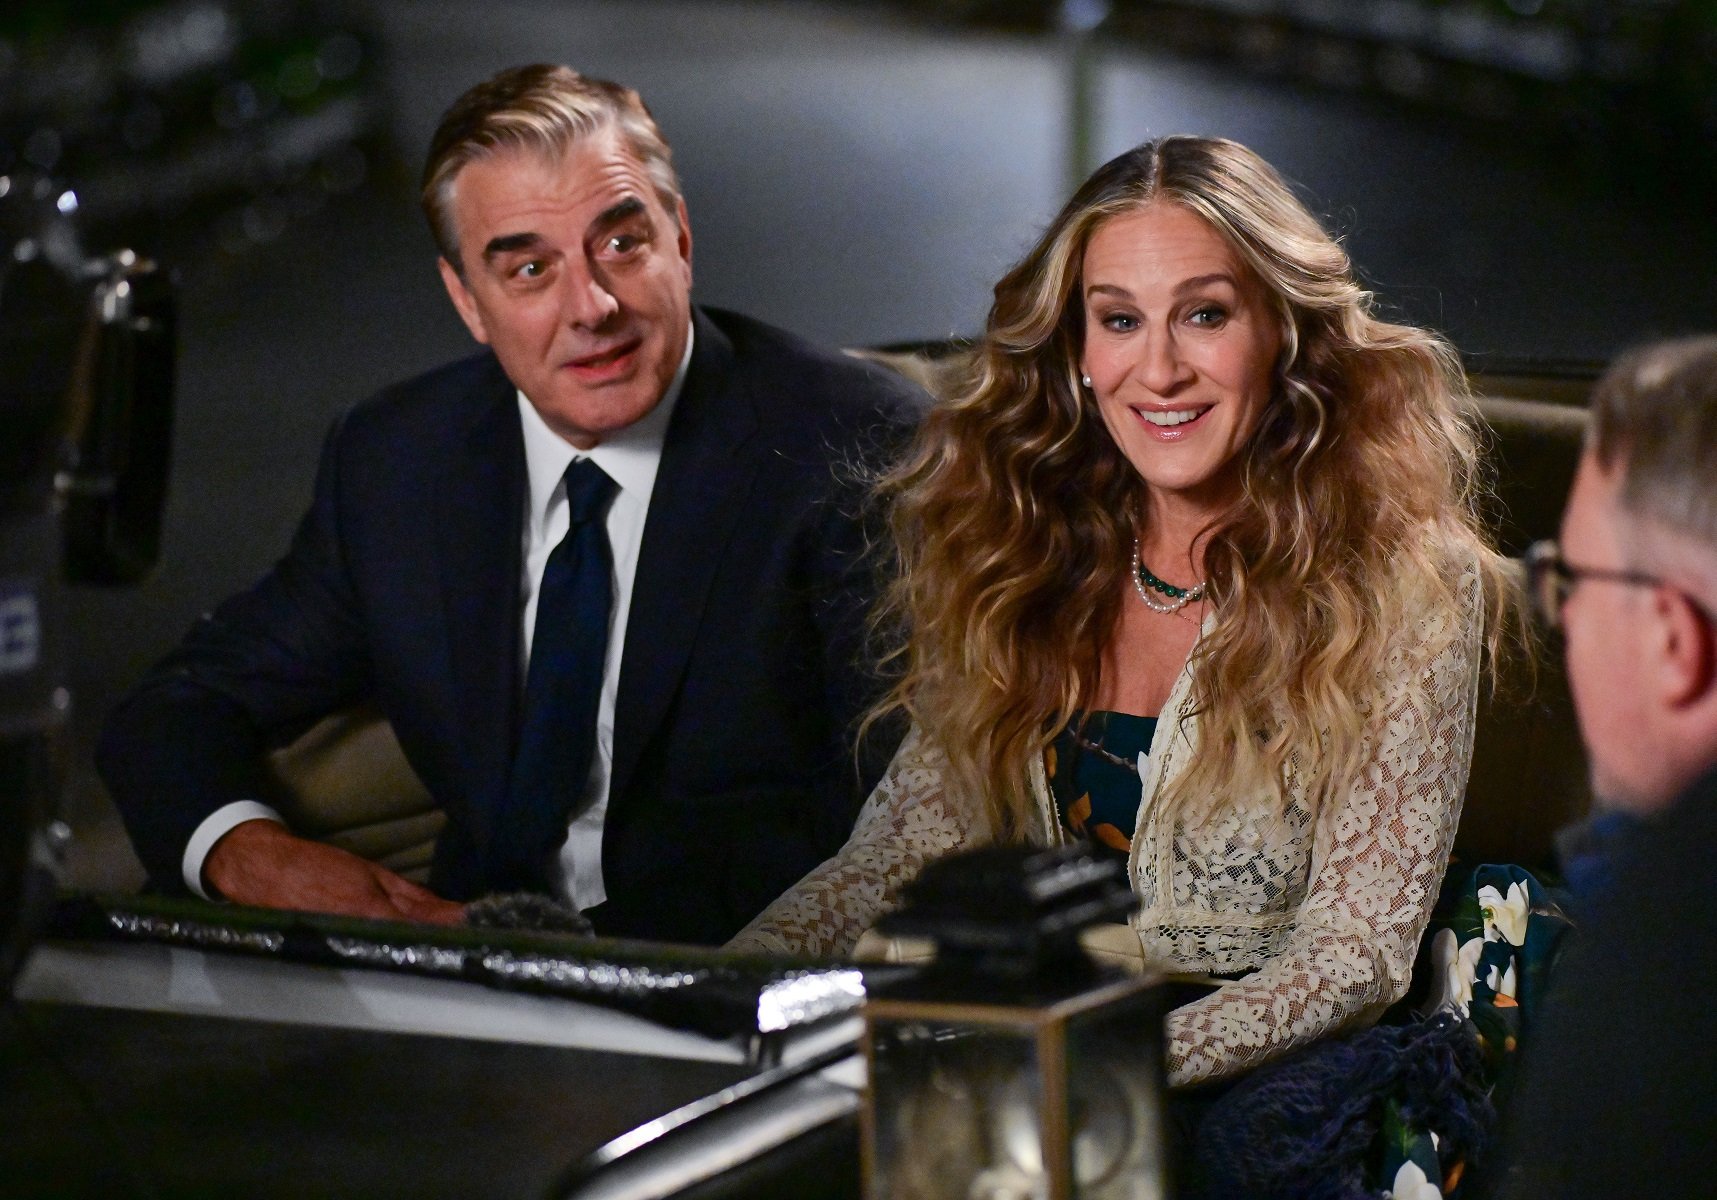 Chris Noth and Sarah Jessica Parker are seen in Madison Square Park filming scenes for 'And Just Like That...', the 'Sex and the City' reboot